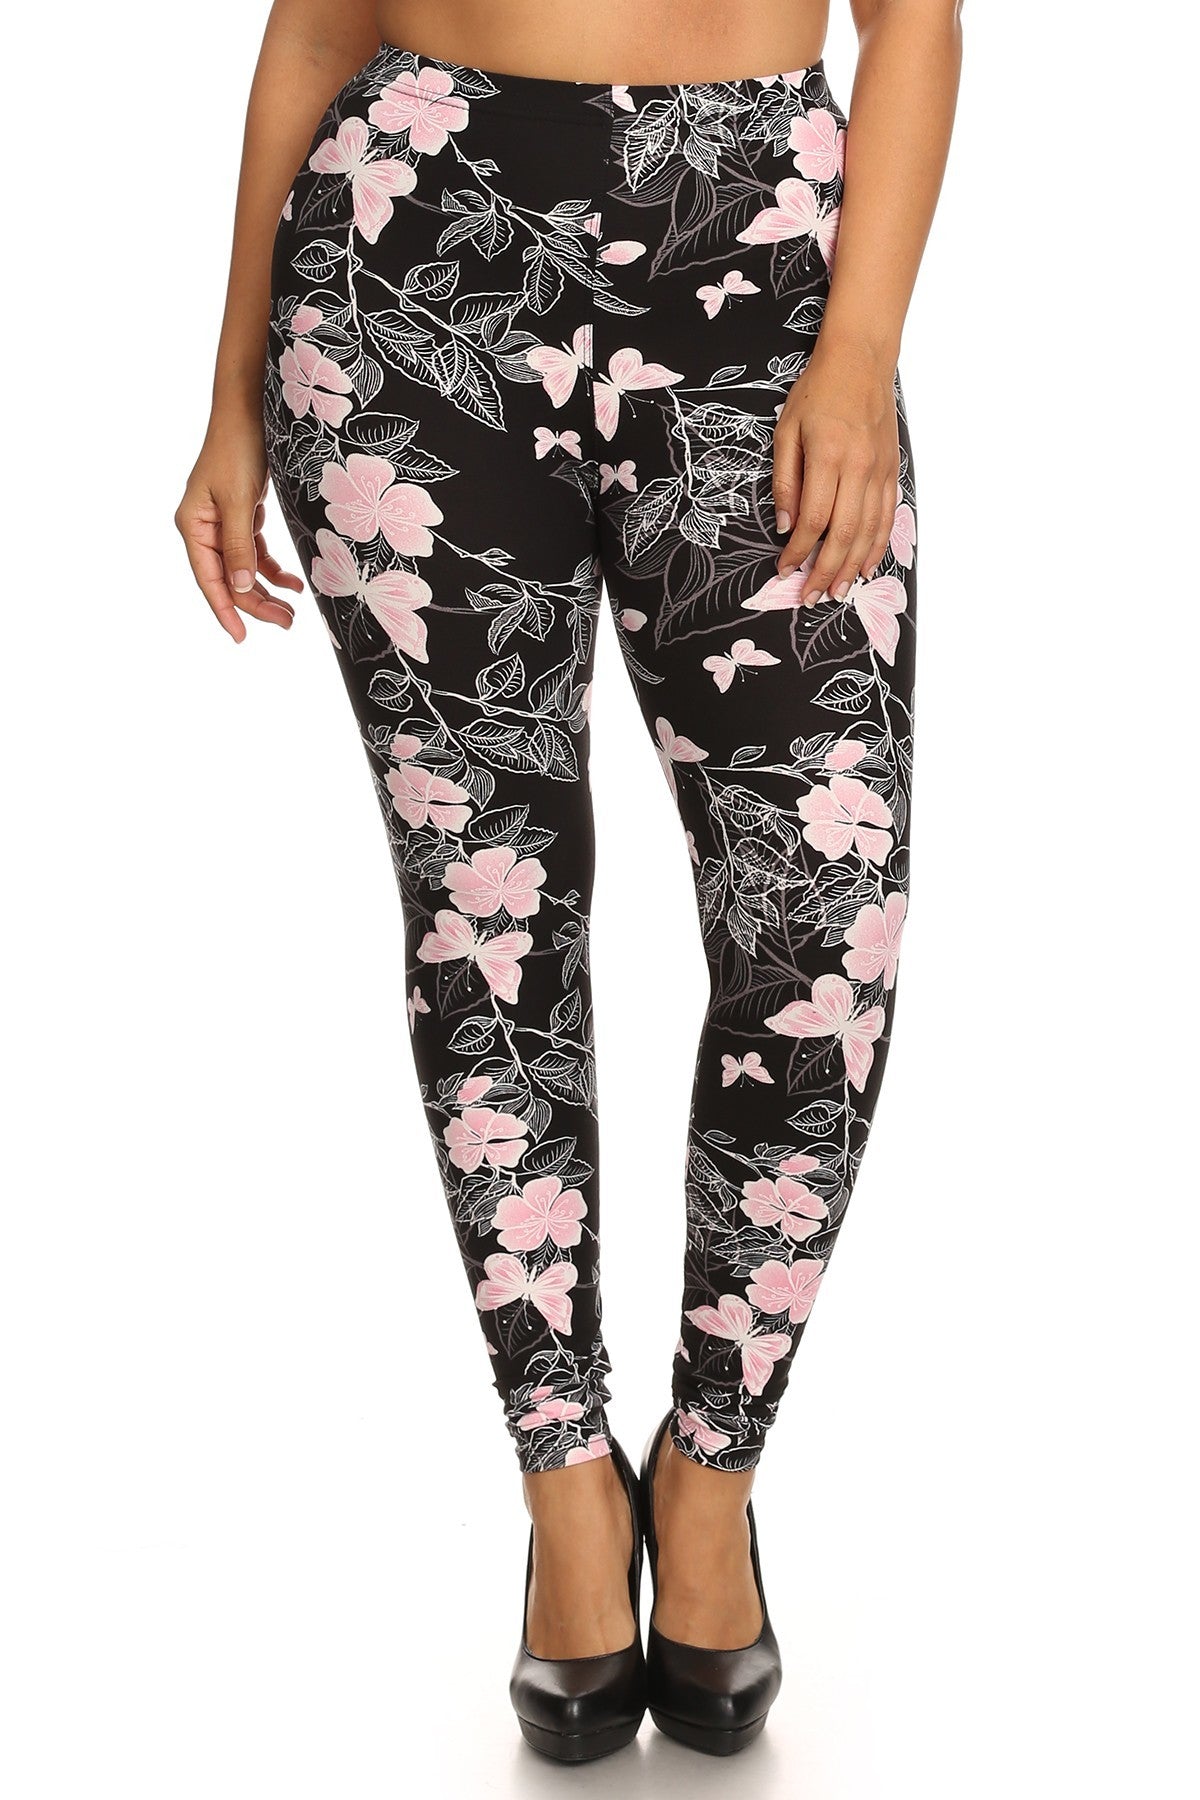 Multi/One Size Fits Most Plus Size Super Soft Peach Skin Fabric, Butterfly Graphic Printed Knit Legging With Elastic Waist Detail - women's leggings at TFC&H Co.